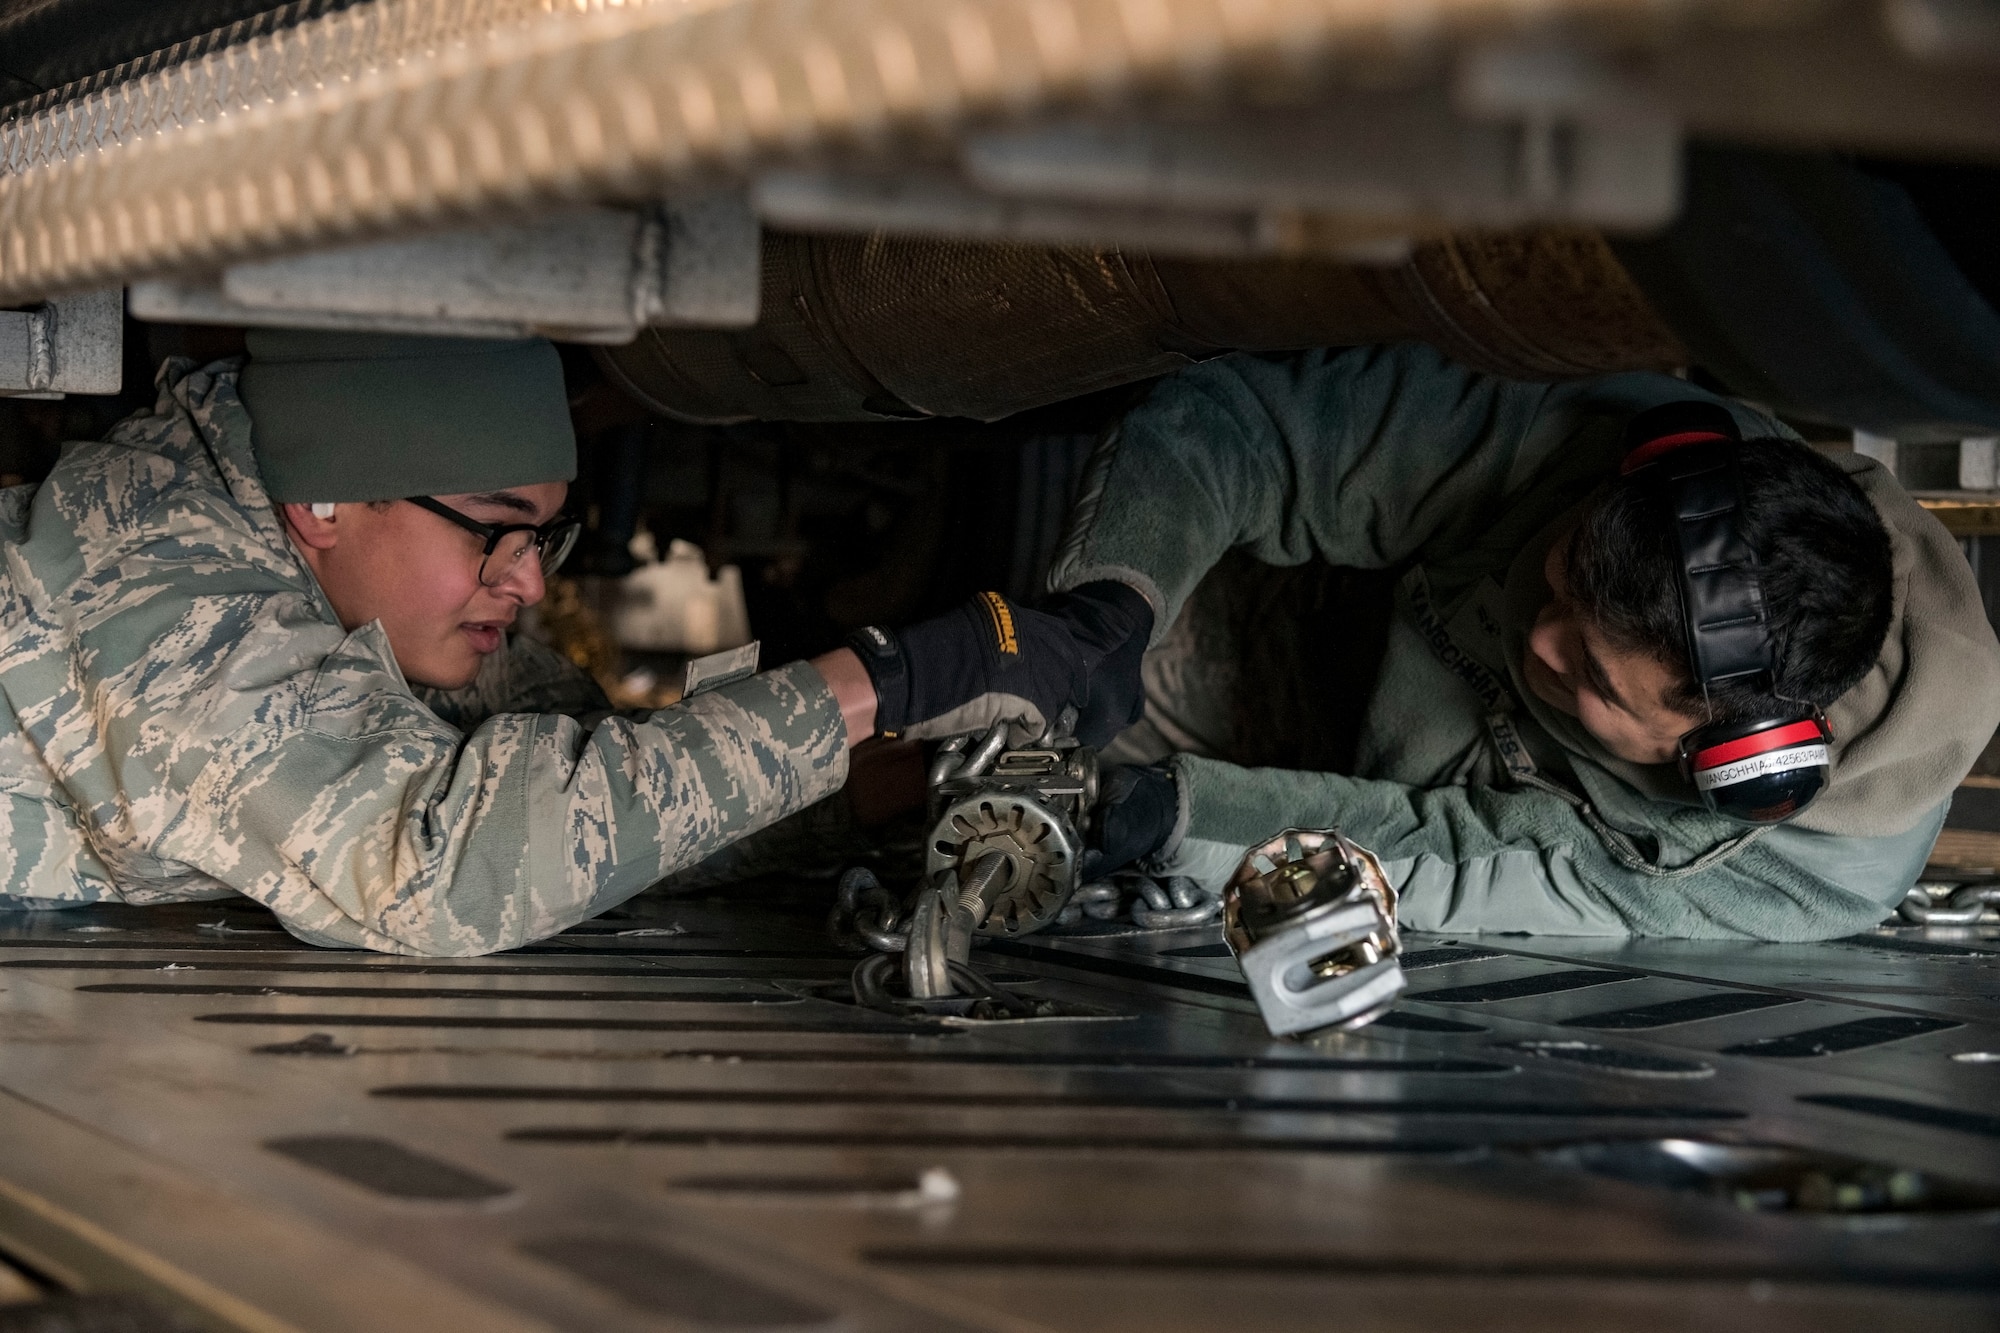 Ramp operations specialists, Airman 1st Class Francisco Garcia Matos, 71st Aerial Port Squadron, Joint Base Langley-Eustis, Va., and Jacob Vangchhia, 436th APS, install cargo chains to secure a vehicle to a C-17 Globemaster III cargo floor Jan. 11, 2019, at Dover Air Force Base, Del. Garcia Matos and Vangchhia, along with other ramp operations personnel loaded five vehicles belonging to the Delaware National Guard's 31st Civil Support Team, Weapons of Mass Destruction headquartered in Smyrna, Del. The 71st APS is a geographically-separated unit of the 512th Airlift Wing, Dover AFB (U.S. Air Force photo by Roland Balik)